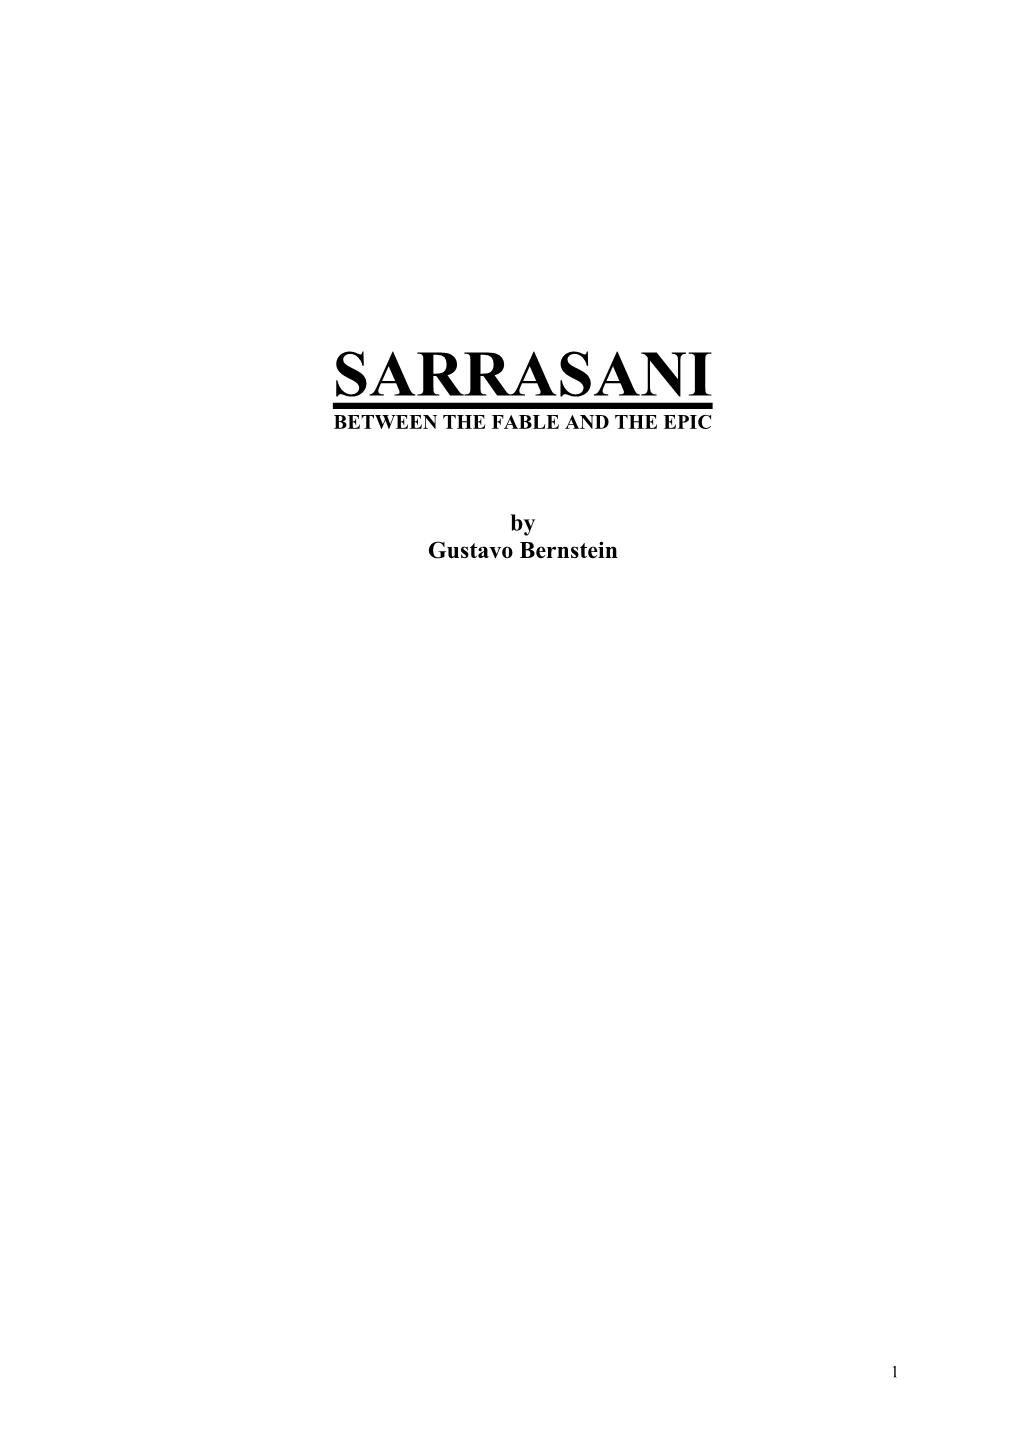 Sarrasani Between the Fable and the Epic